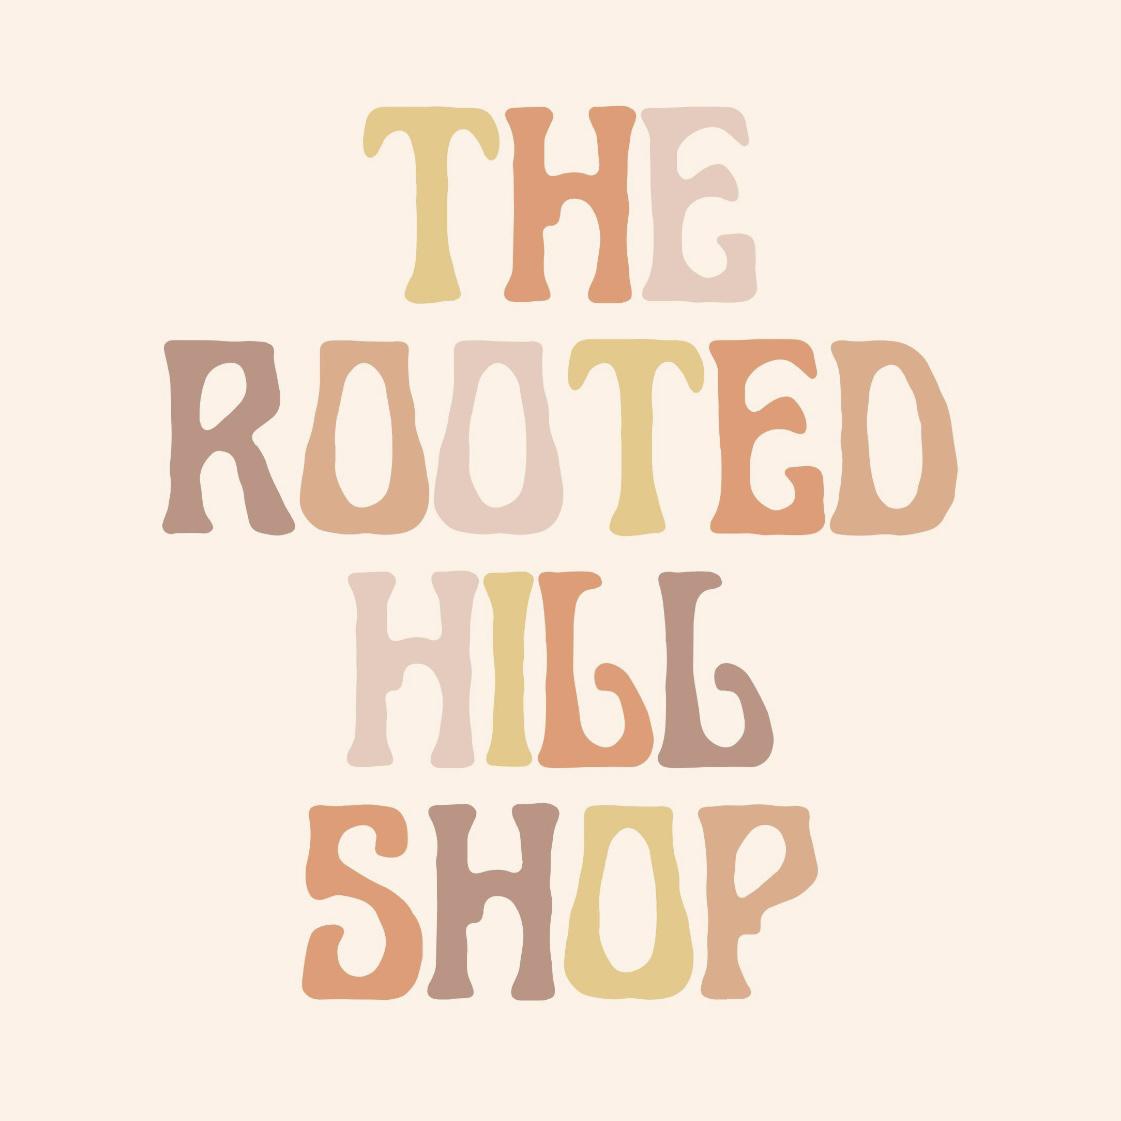 Rooted Hill ✿'s images